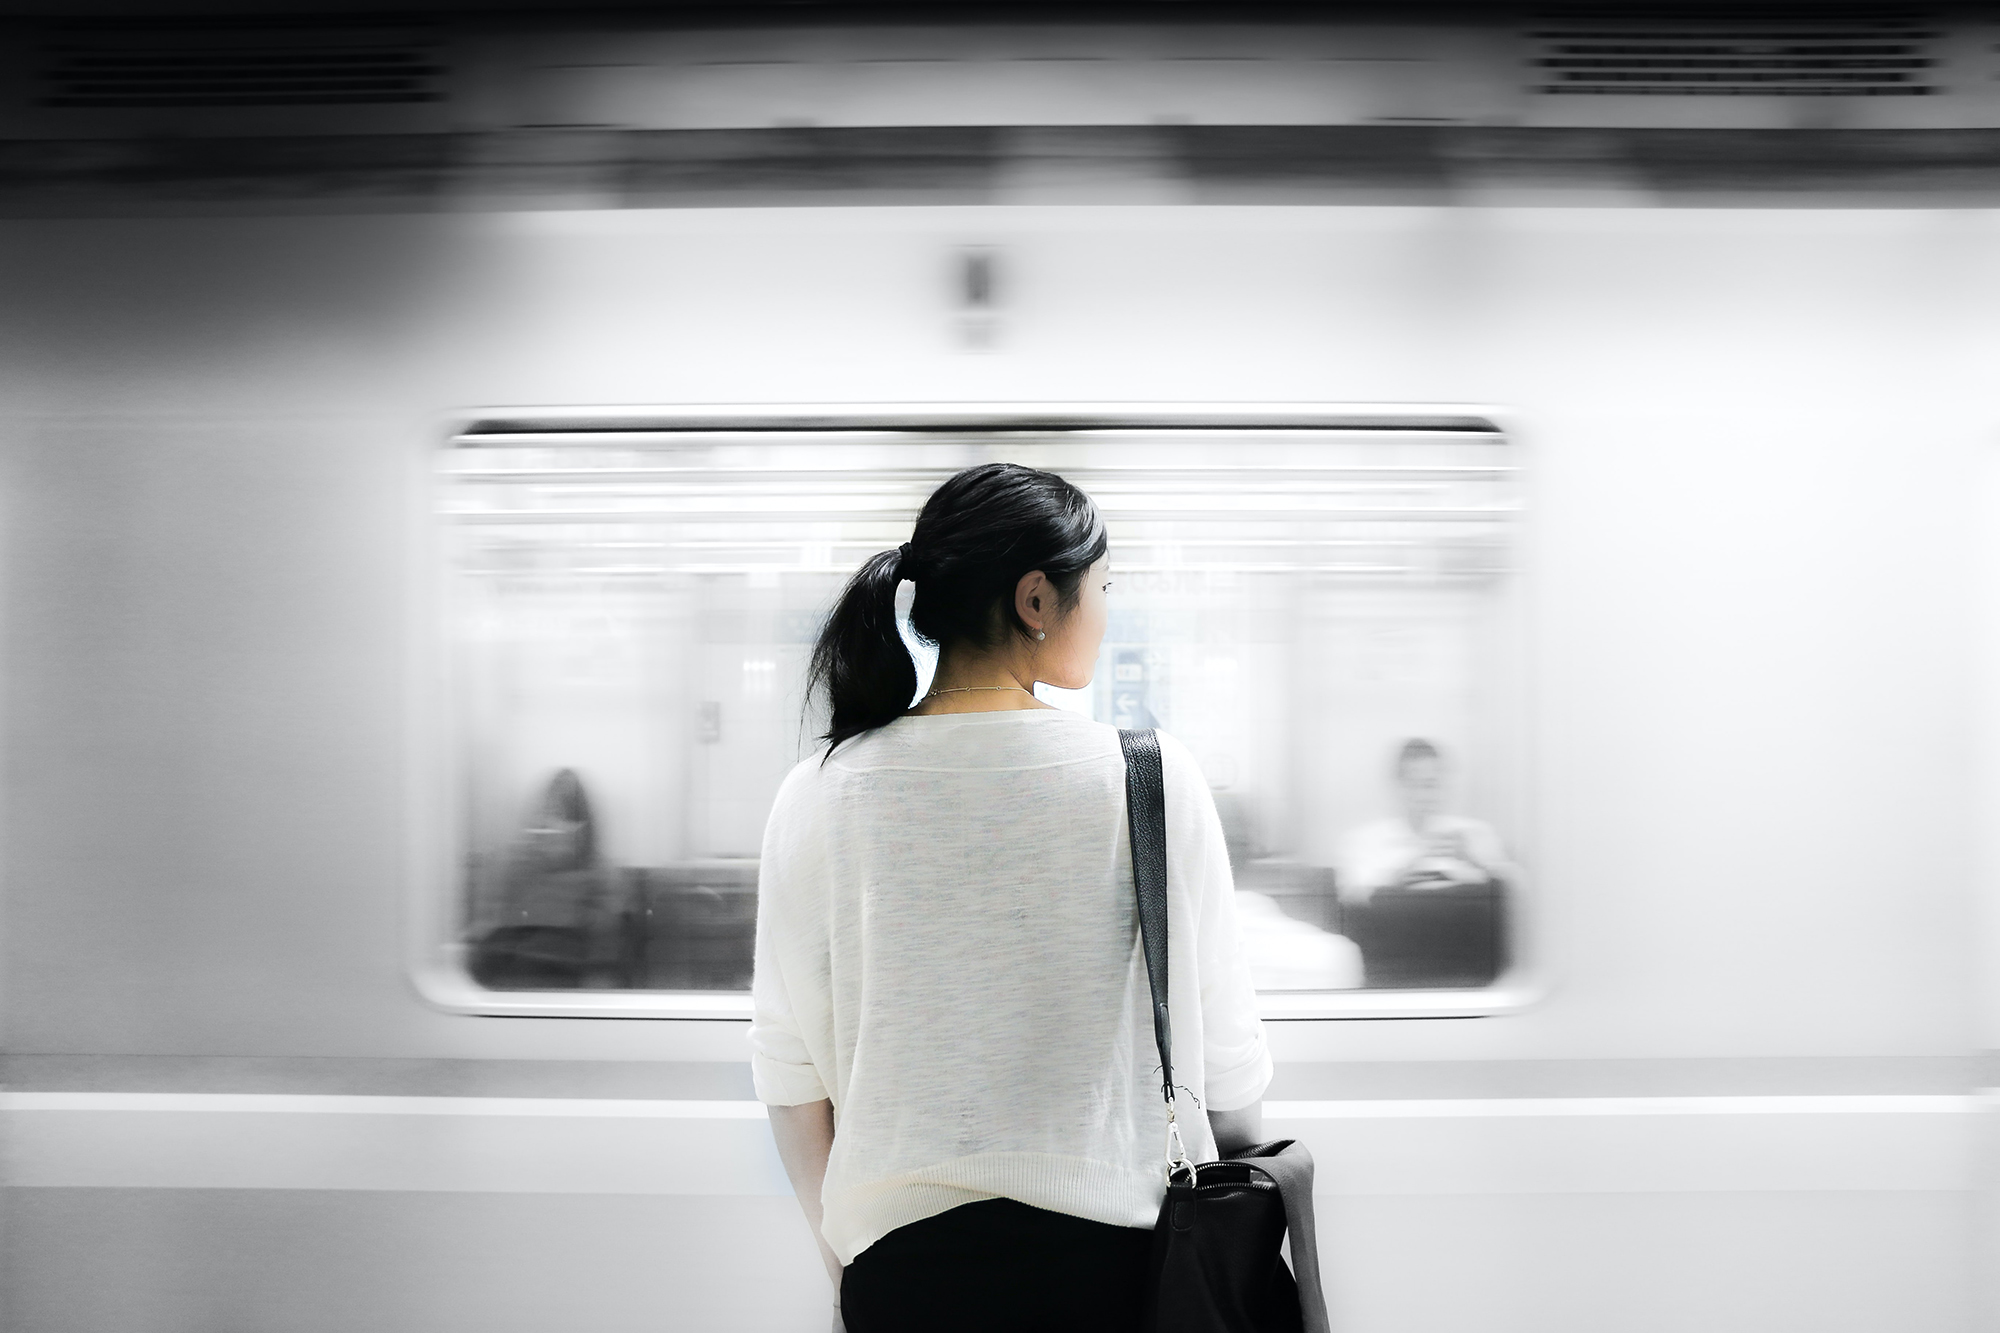 A woman in front of a subway train